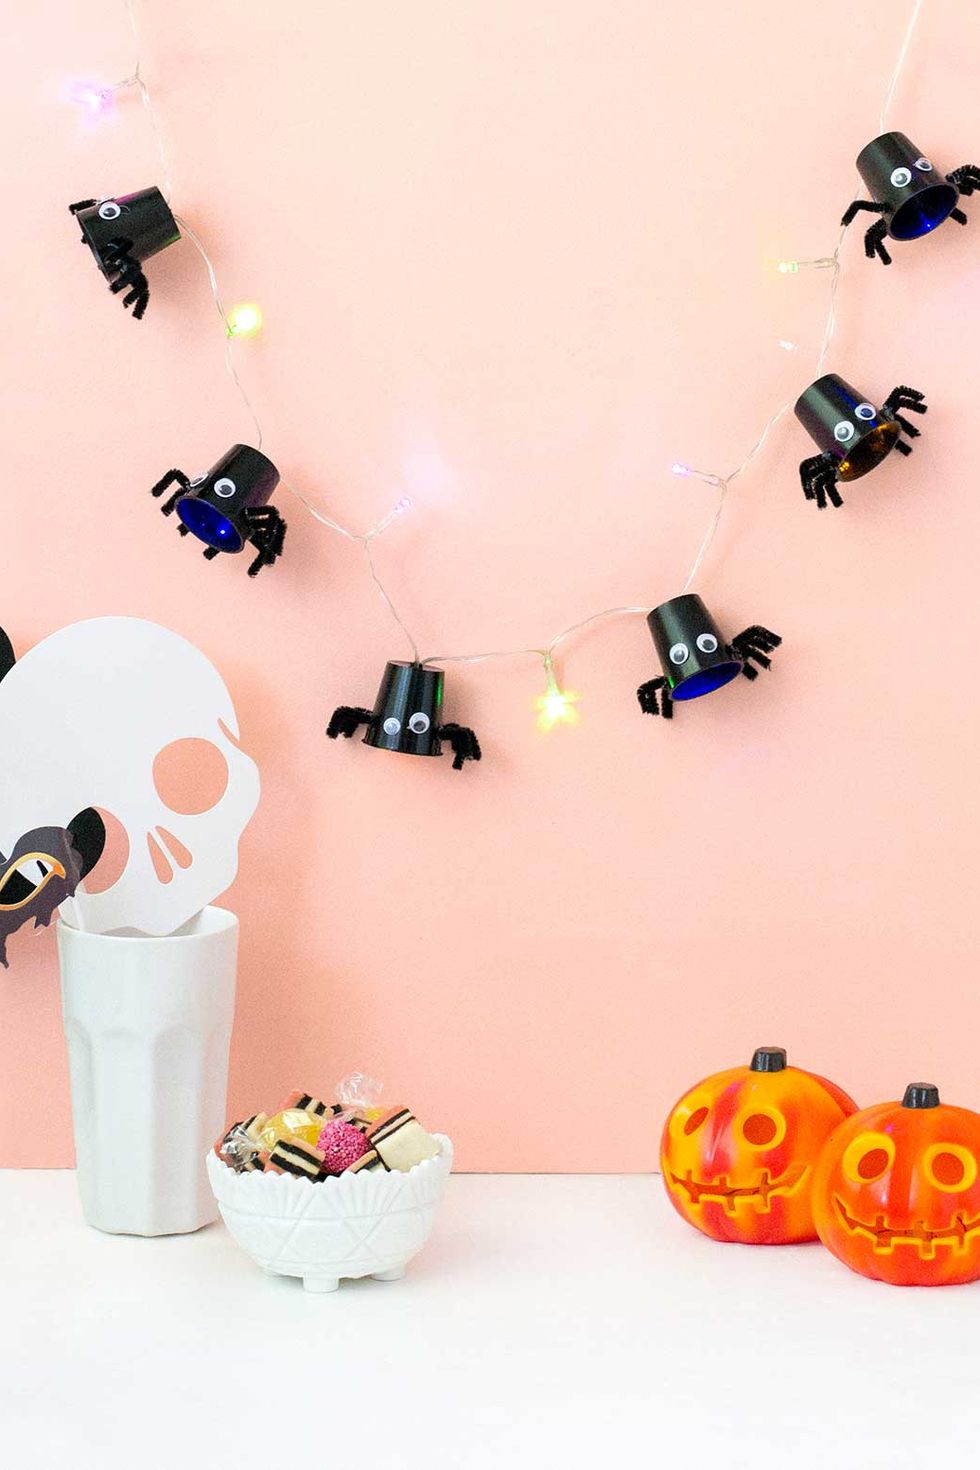 75 Easy Halloween Crafts for Adults - Best DIY Halloween Craft ...